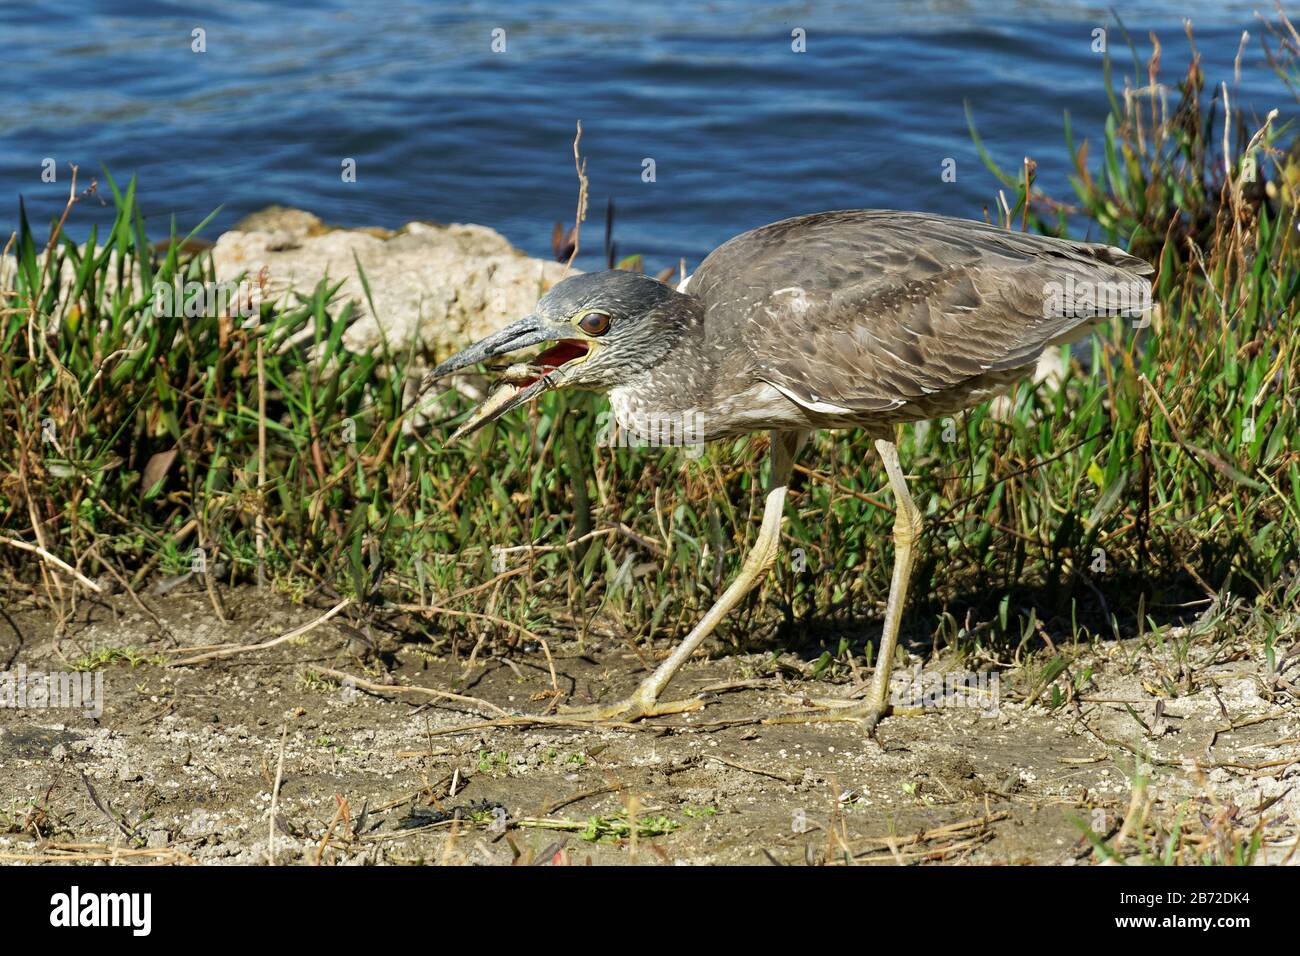 A young Yellow-crowned Night Heron (nyctanassa violacea) feeds on a small crab it plucked from the ground. Stock Photo